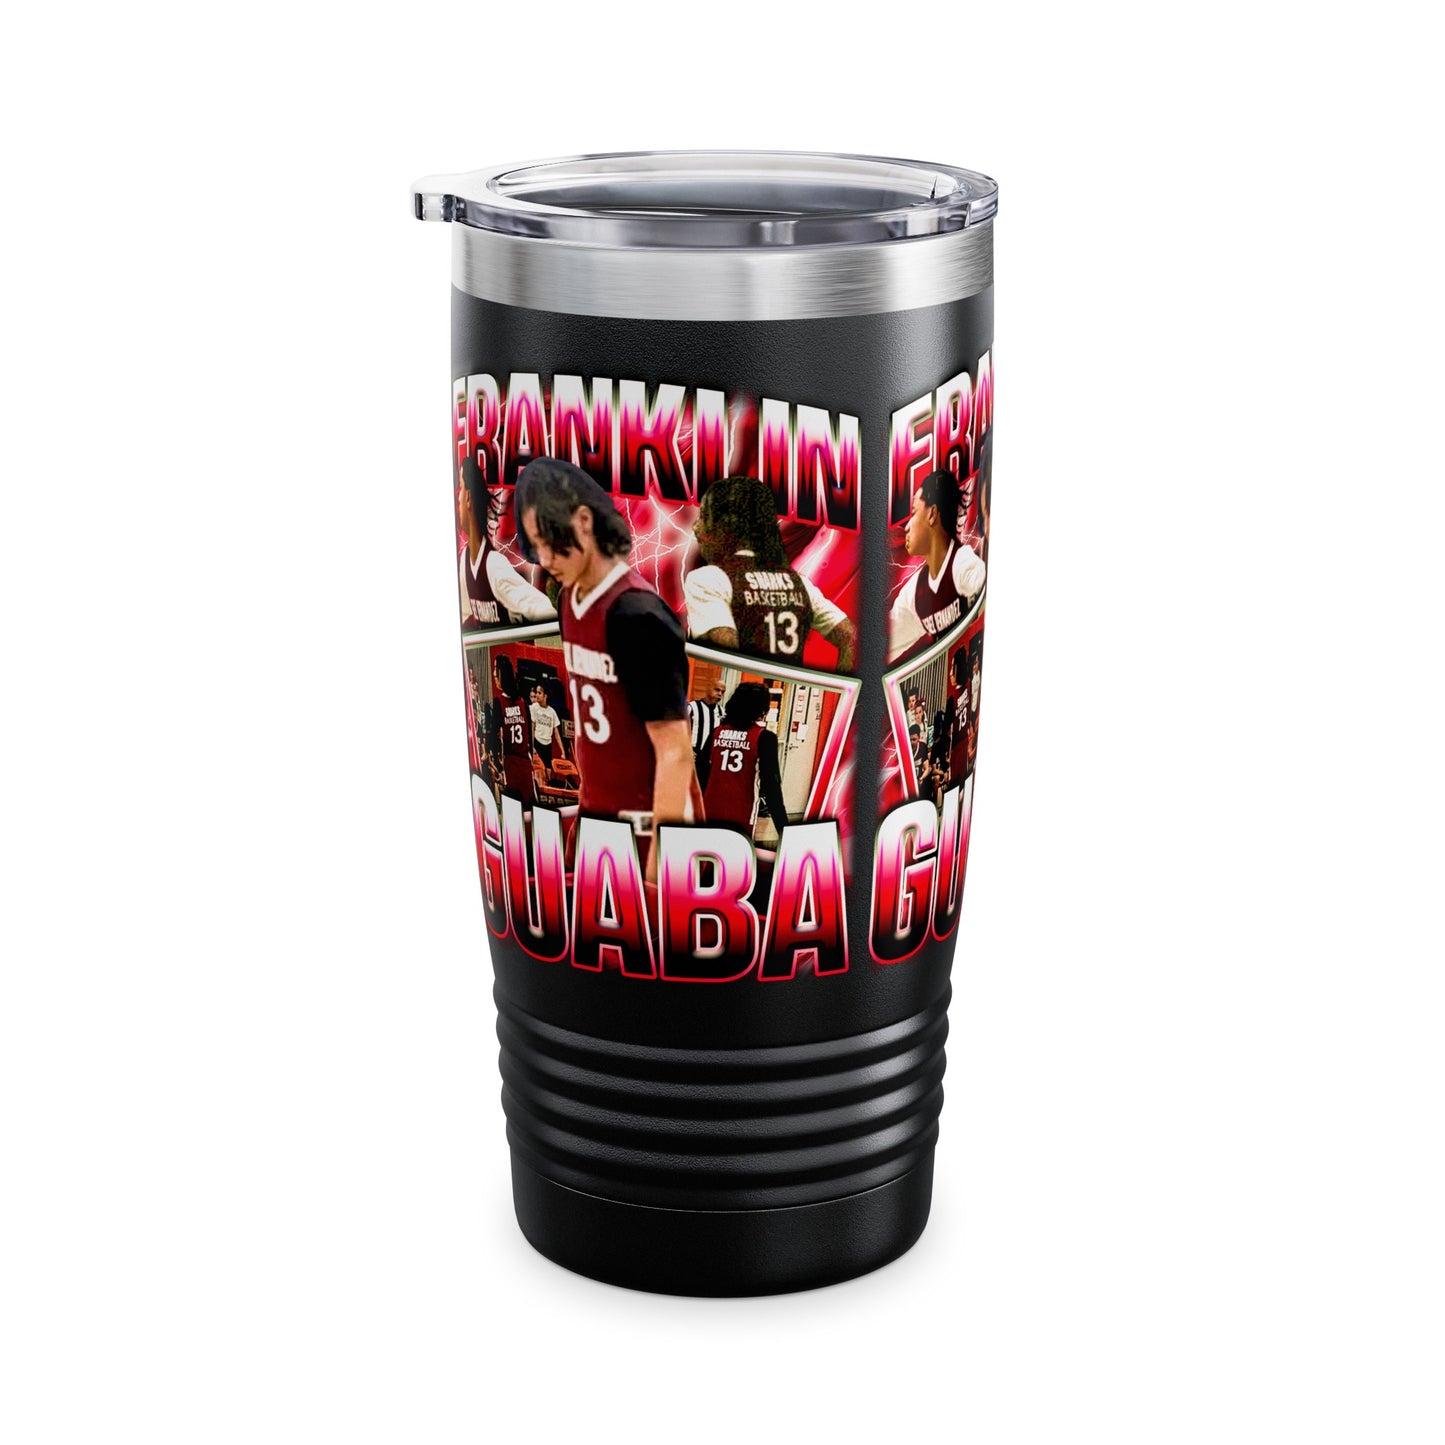 Franklin Guaba Stainless Steal Tumbler